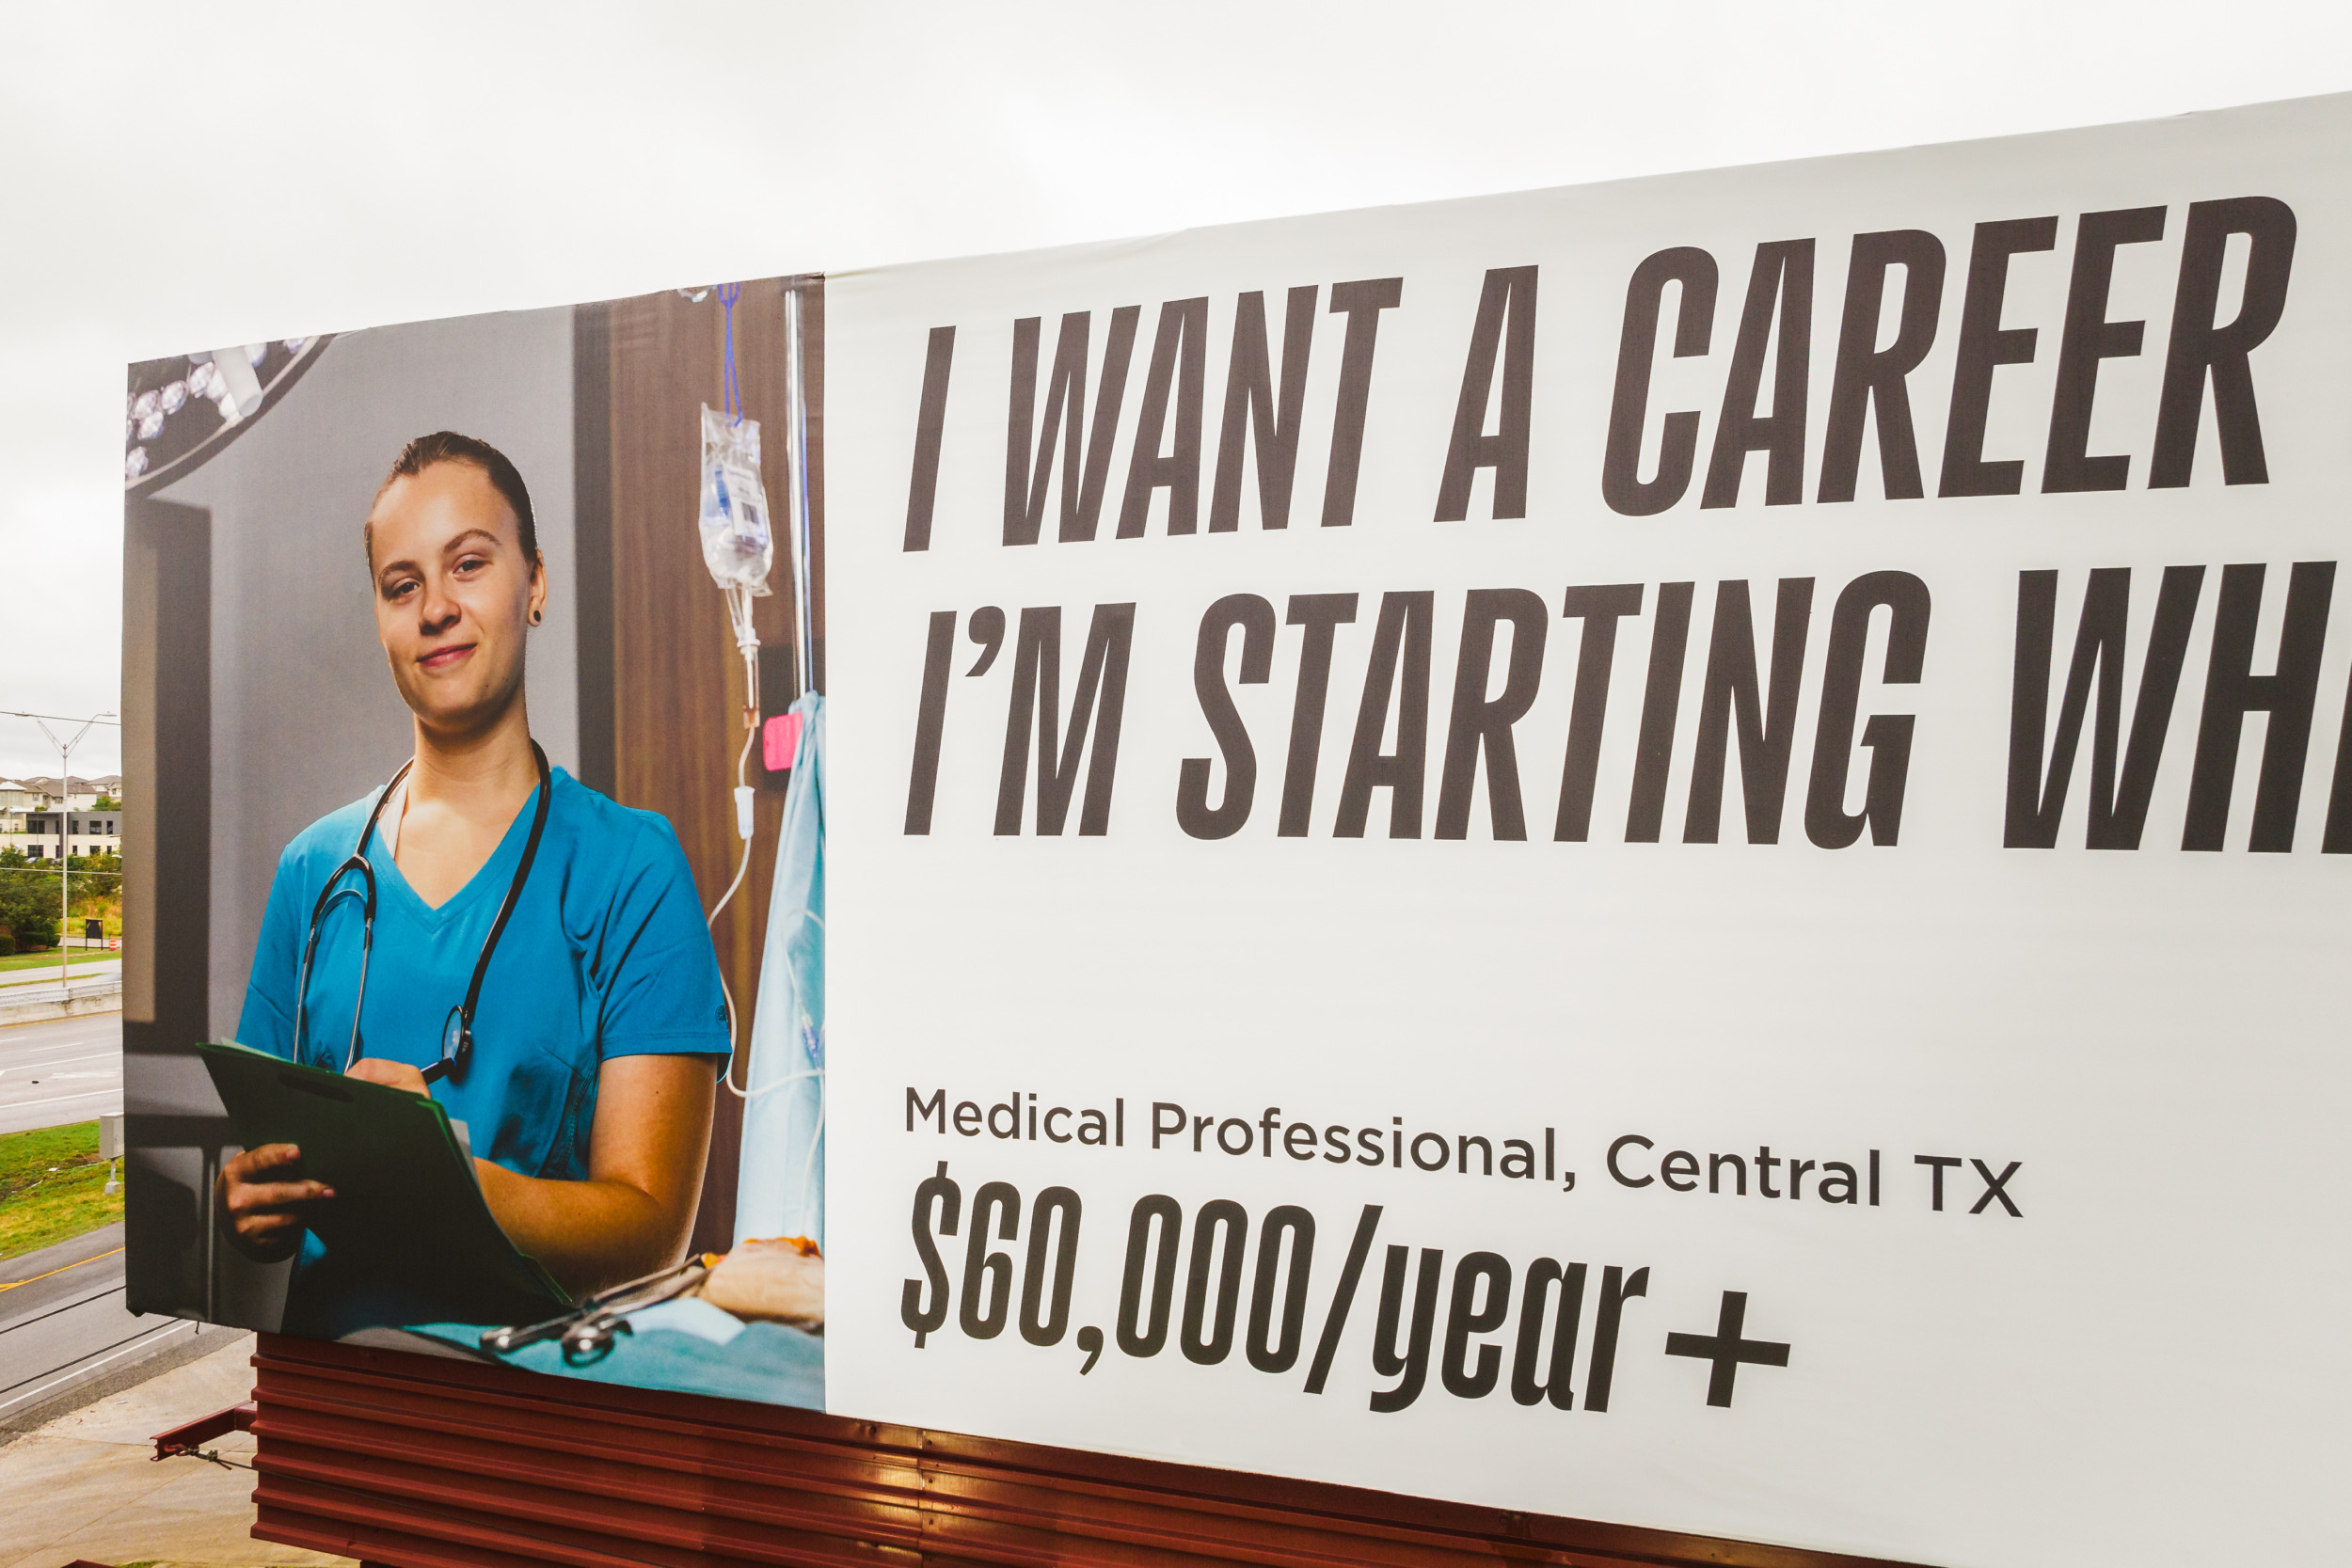 College campaign: Close-up view of billboard with image of person on left side and text "I want a career. i'm starting ... Medical Professional, Central TX. MakeItMovement $60,000/year+"